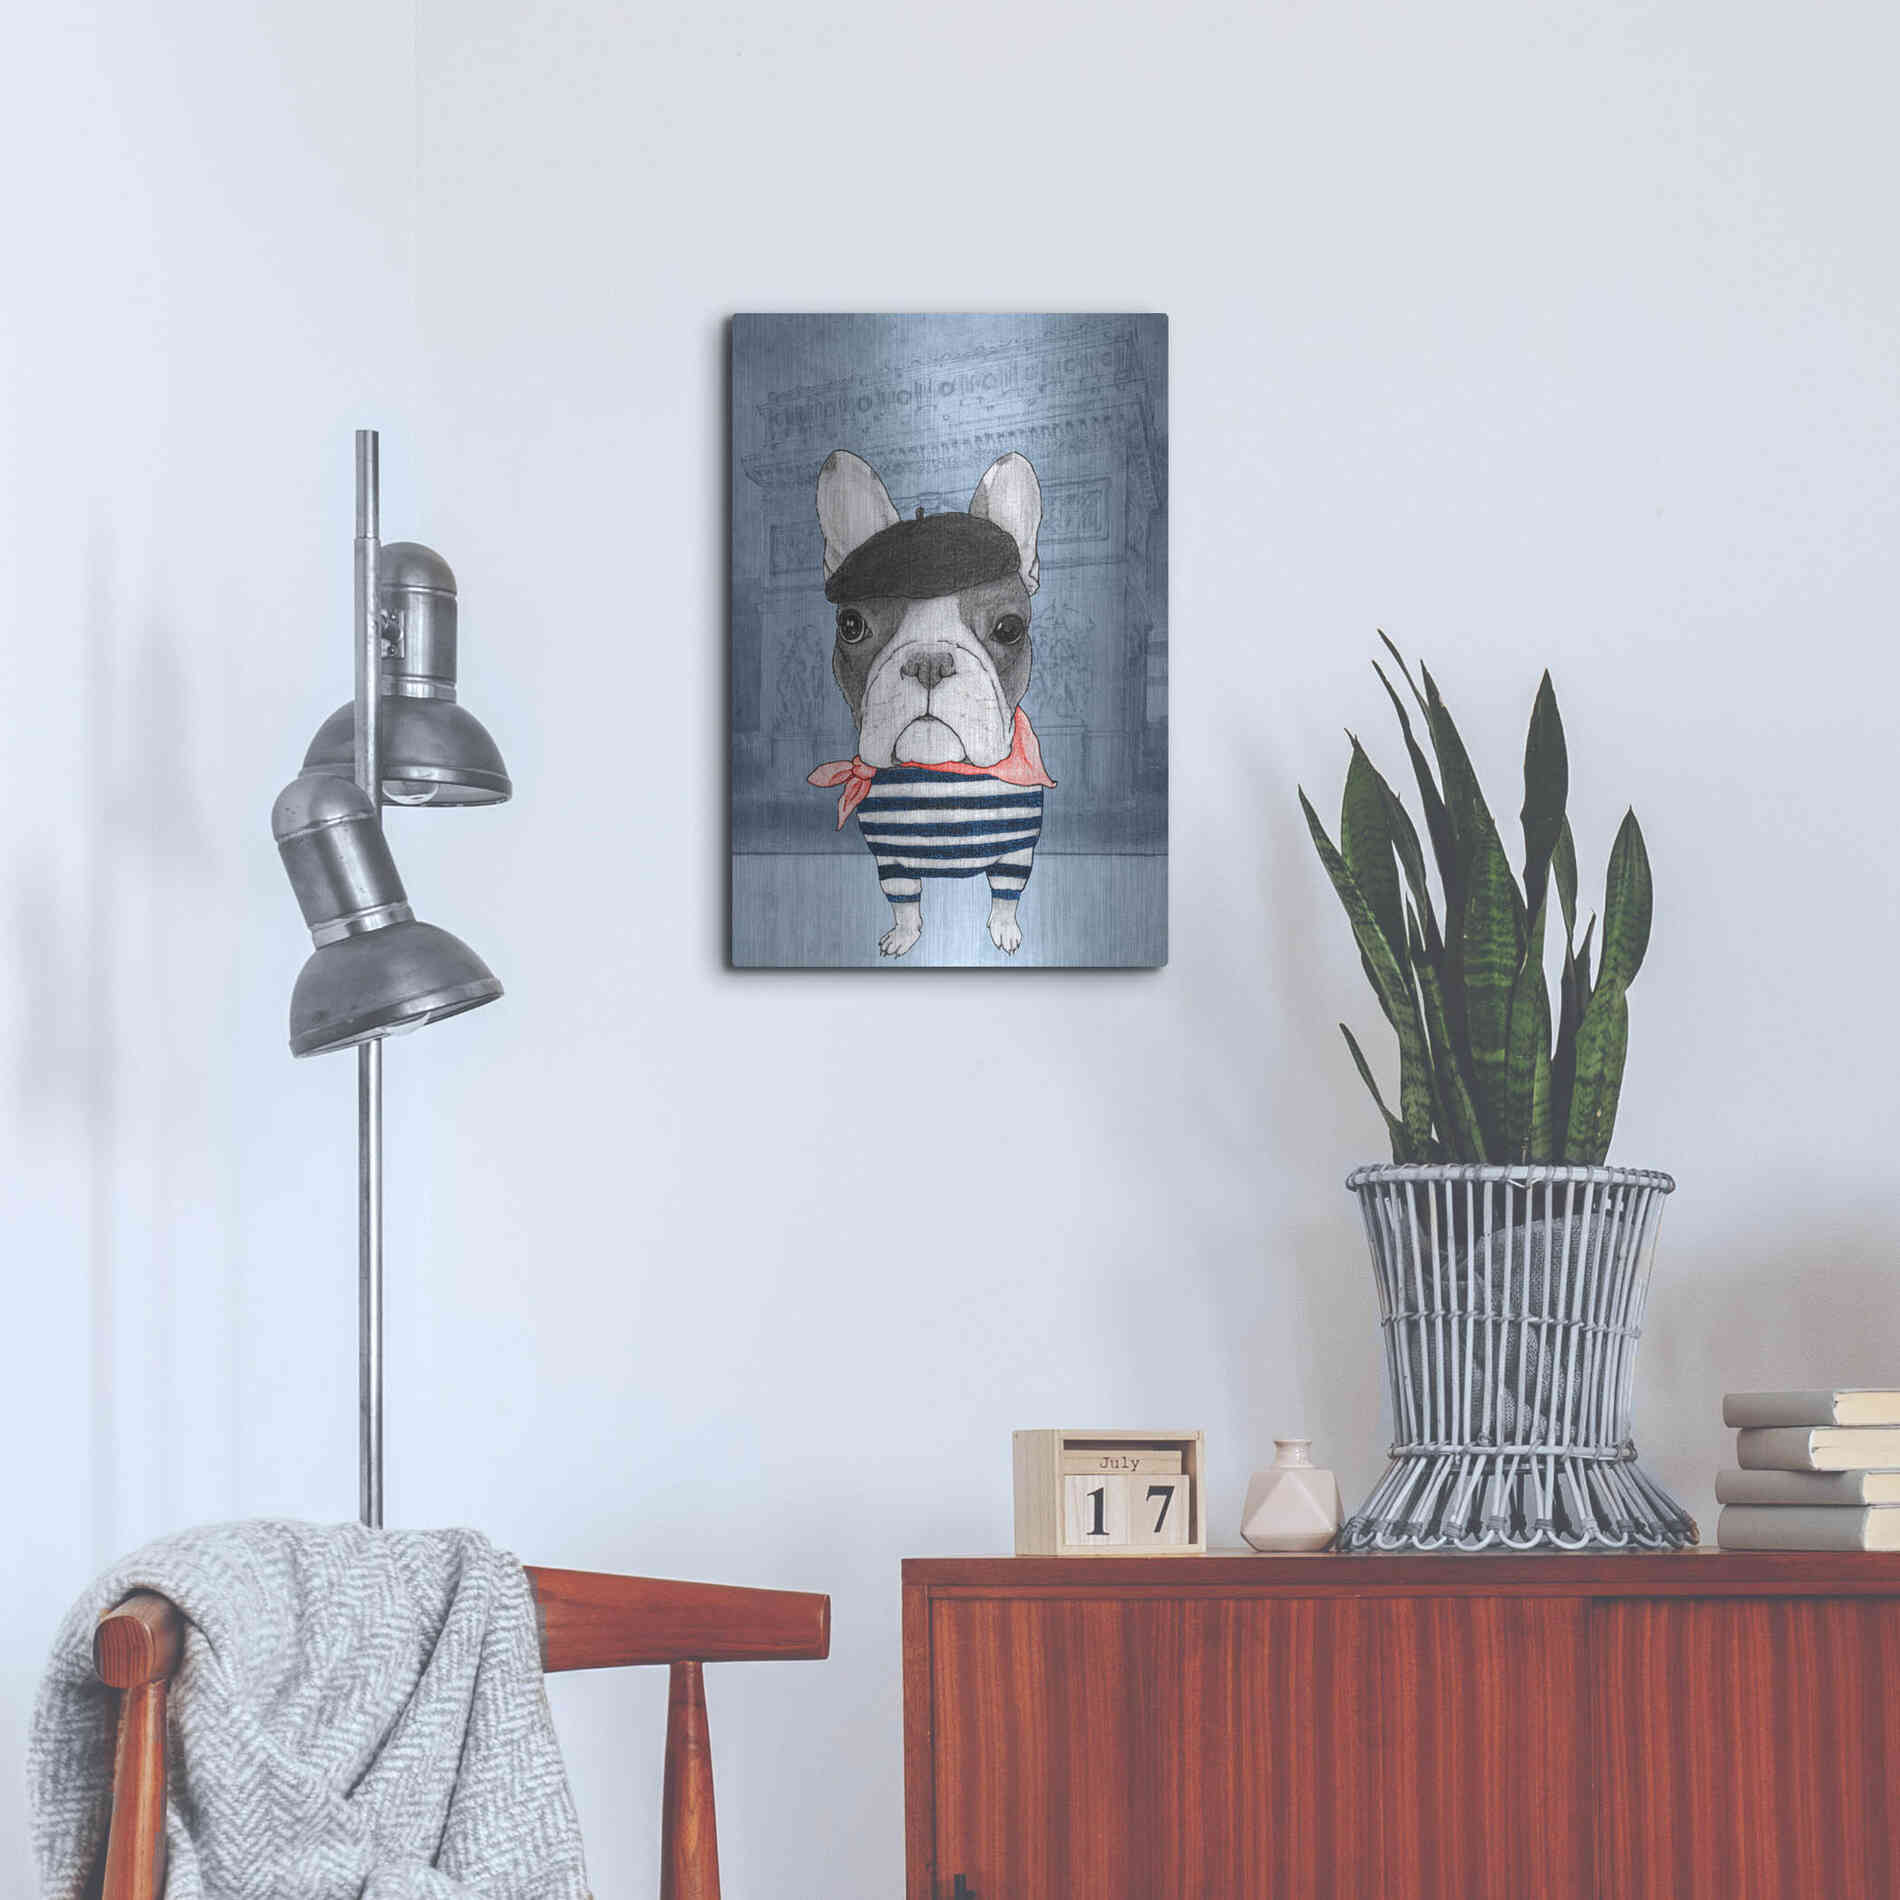 Luxe Metal Art 'French Bulldog with Arc de Triomphe' by Barruf Metal Wall Art,16x24